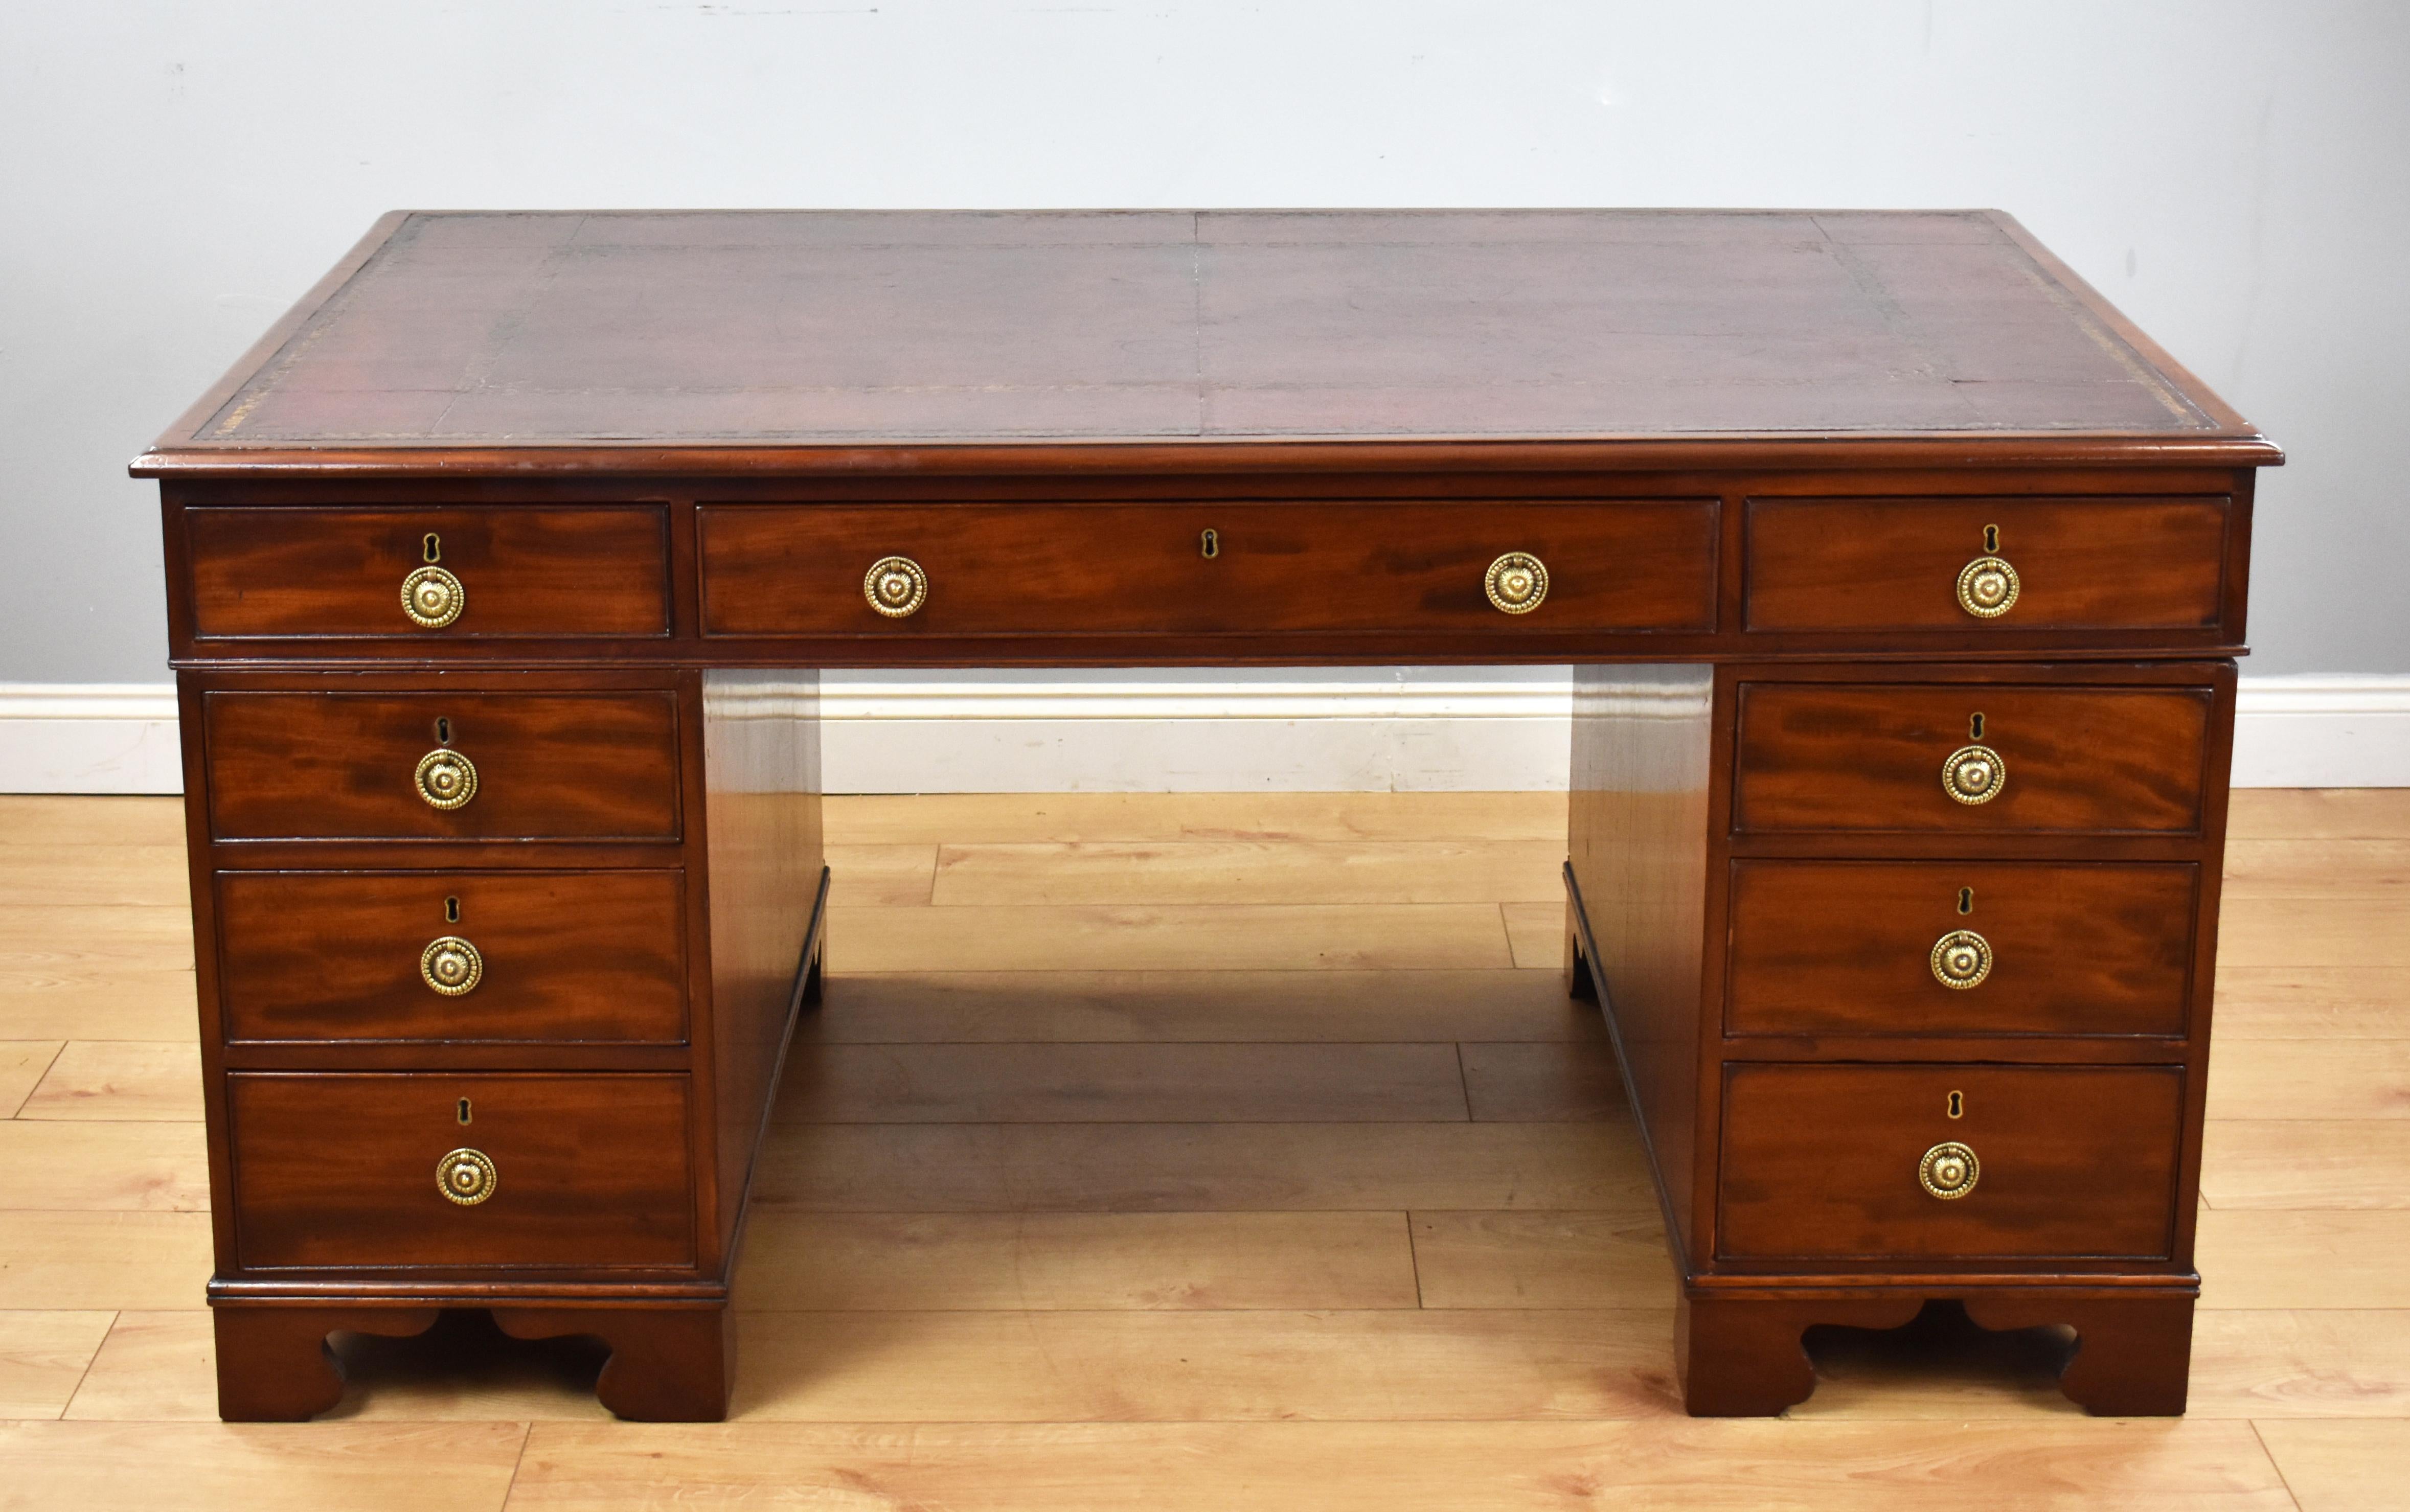 A good quality Regency mahogany partners desk, having a dark red leather insert, decorated with gold tooling above three drawers in the top, with a further three drawers on the opposing side. The top fits onto two pedestals, each having graduated